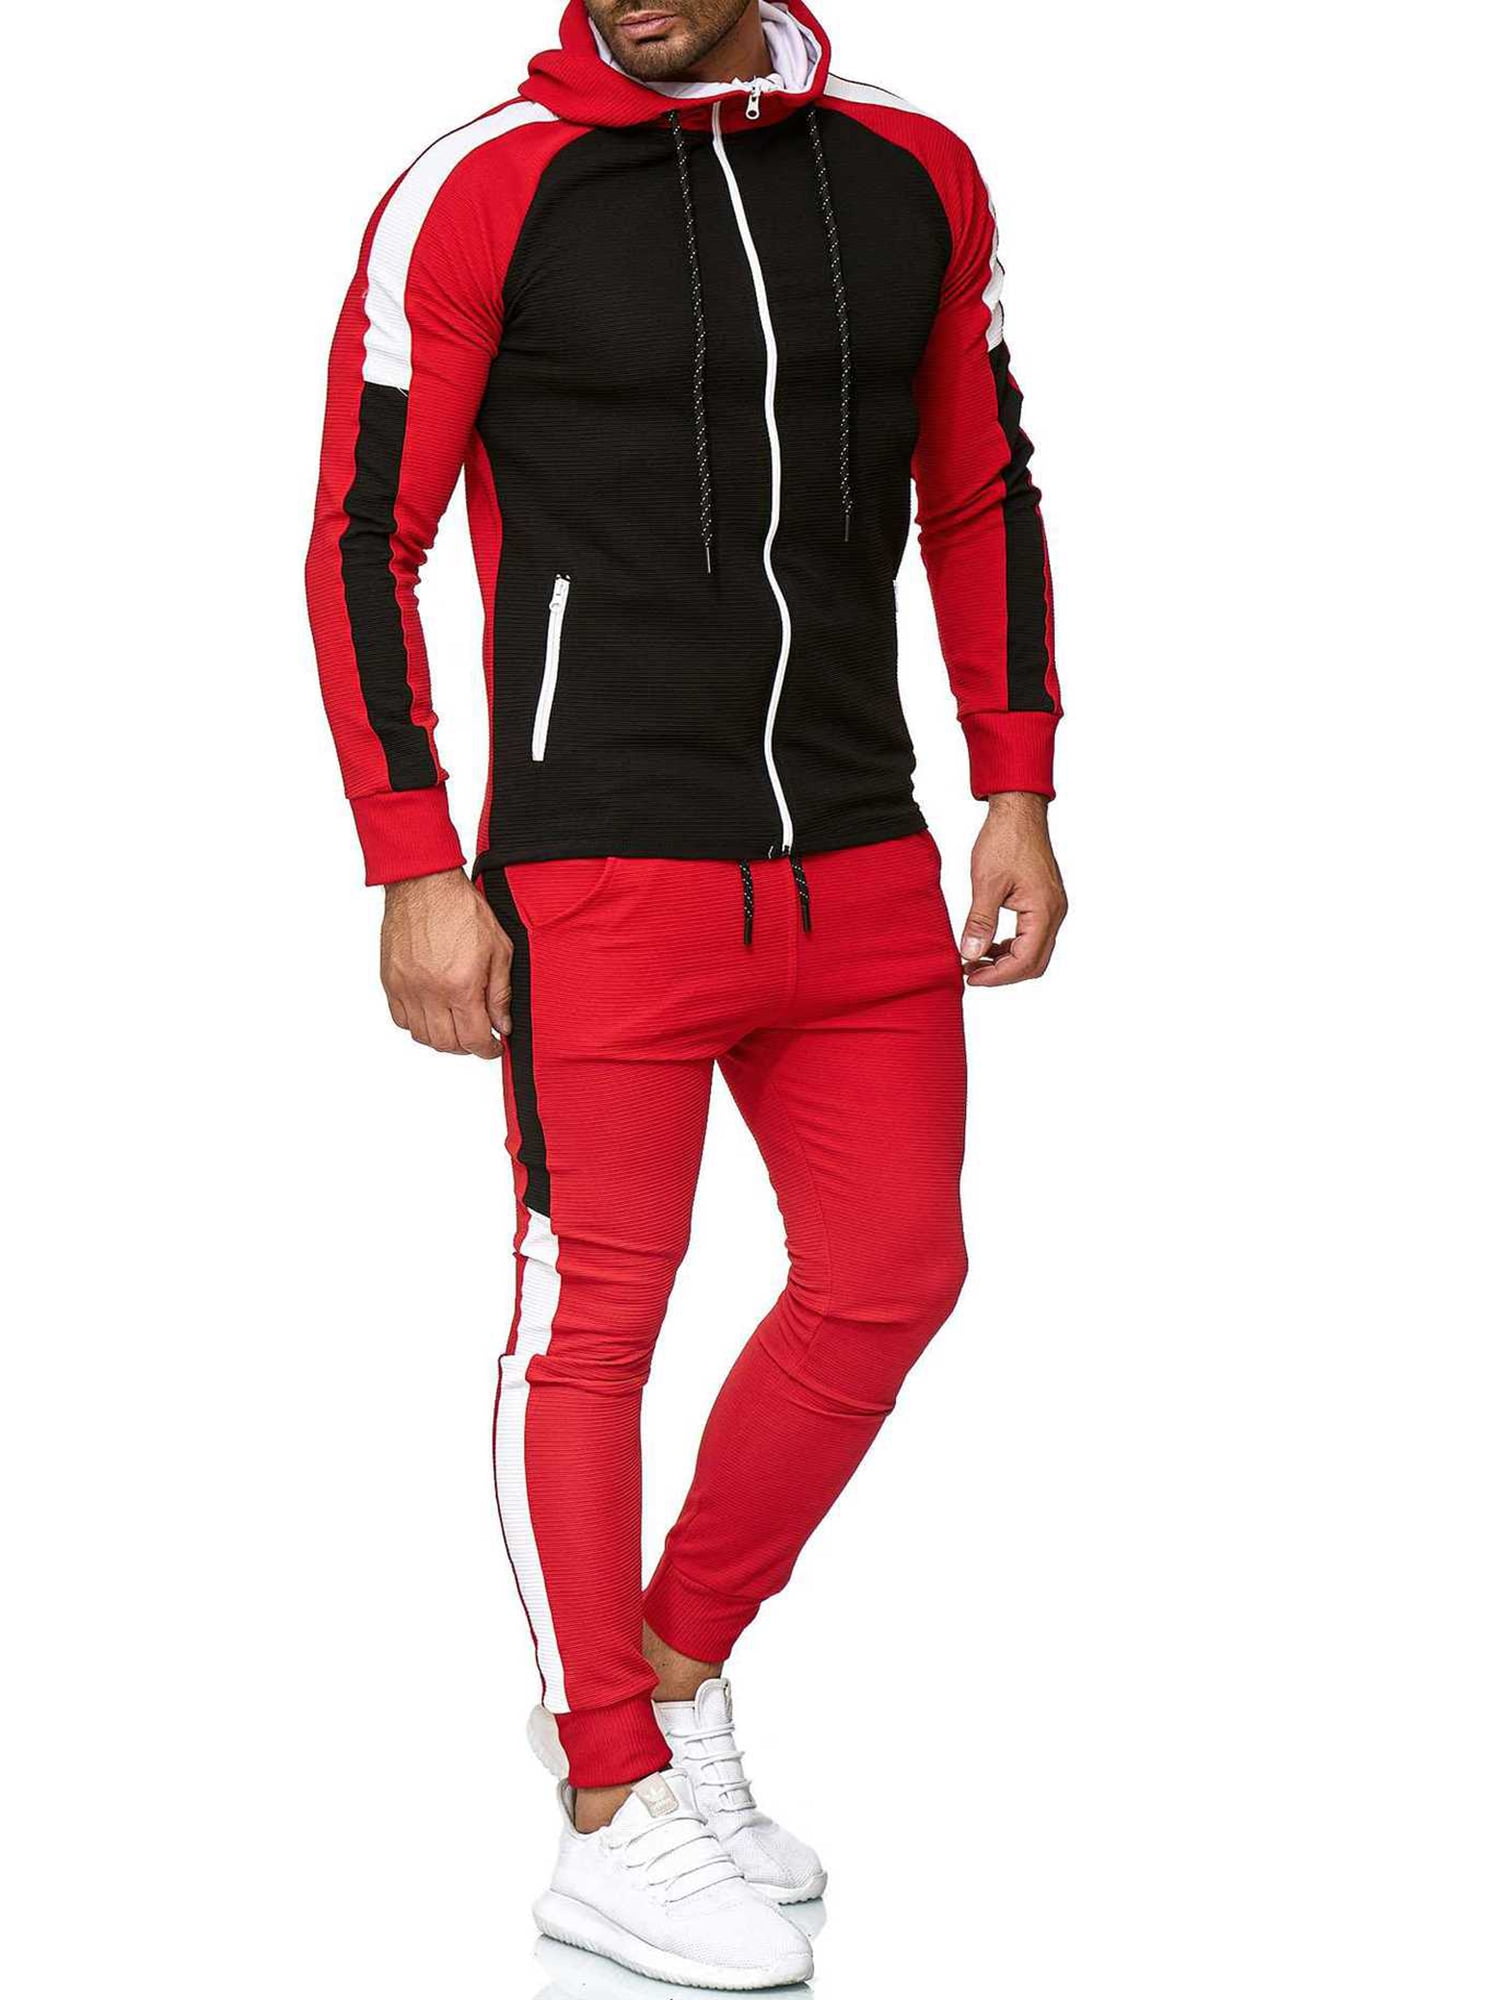 Mens Tracksuit 2 Piece Set Casual Hooded Top and Joggers Bottoms Long Sleeve Full Zipper Color Block Sweatshirt Gym Running Sports Suits Jacket Pants